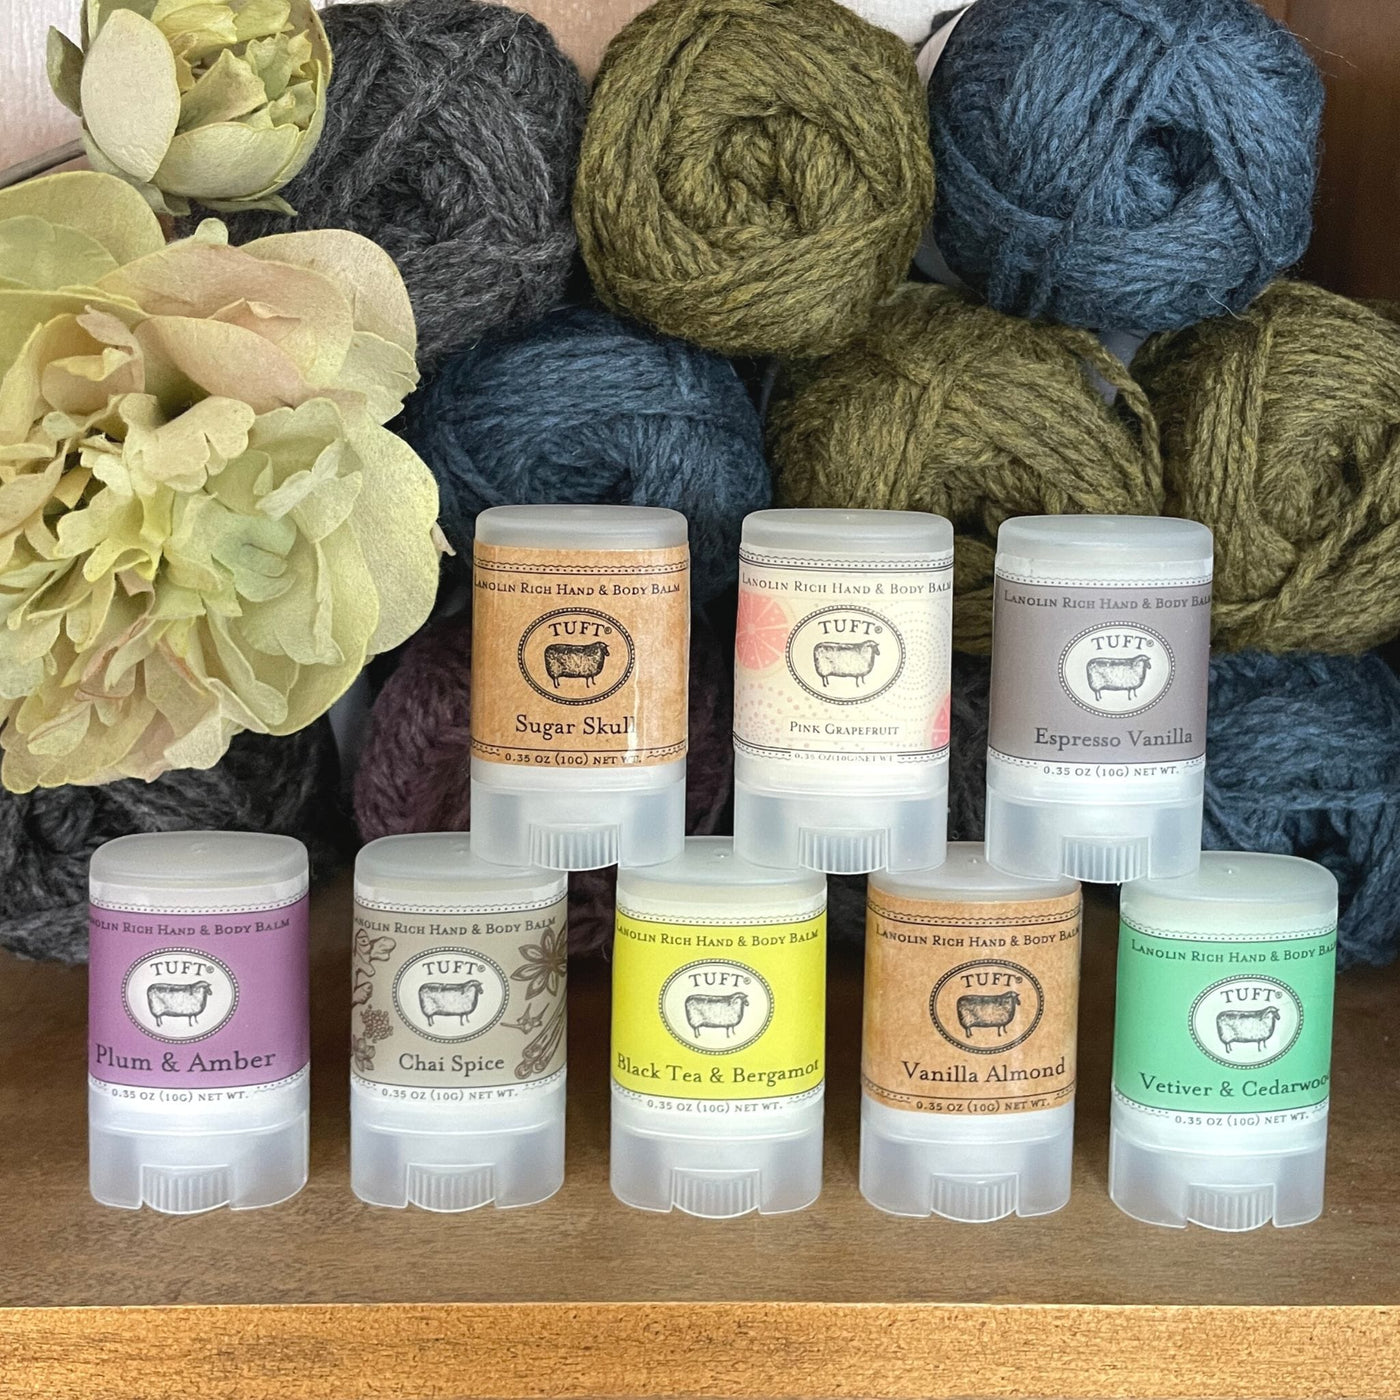 Eight containers of Tuft Woolens hand & body balm, in various scents, arranged on shelf in front of yarn. 